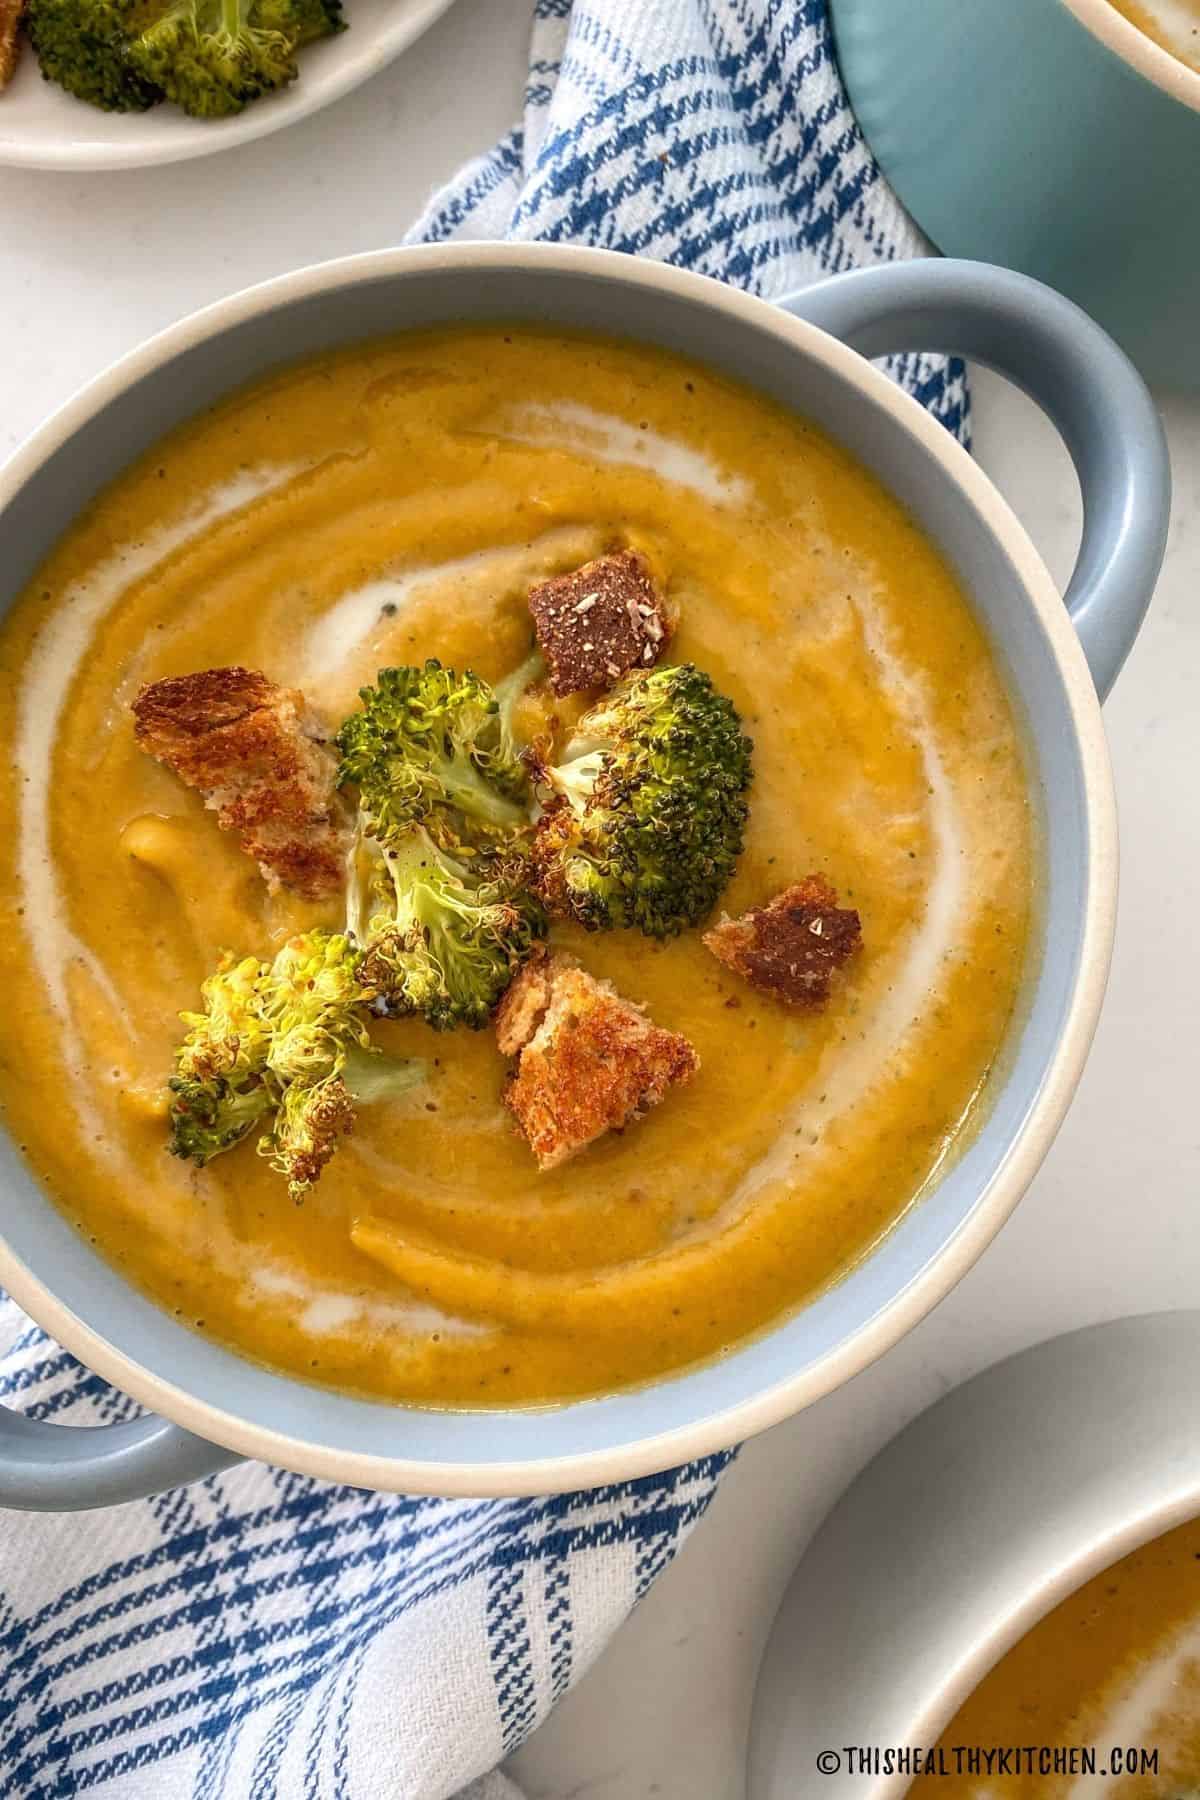 Blue bowl filled with broccoli and sweet potato soup.